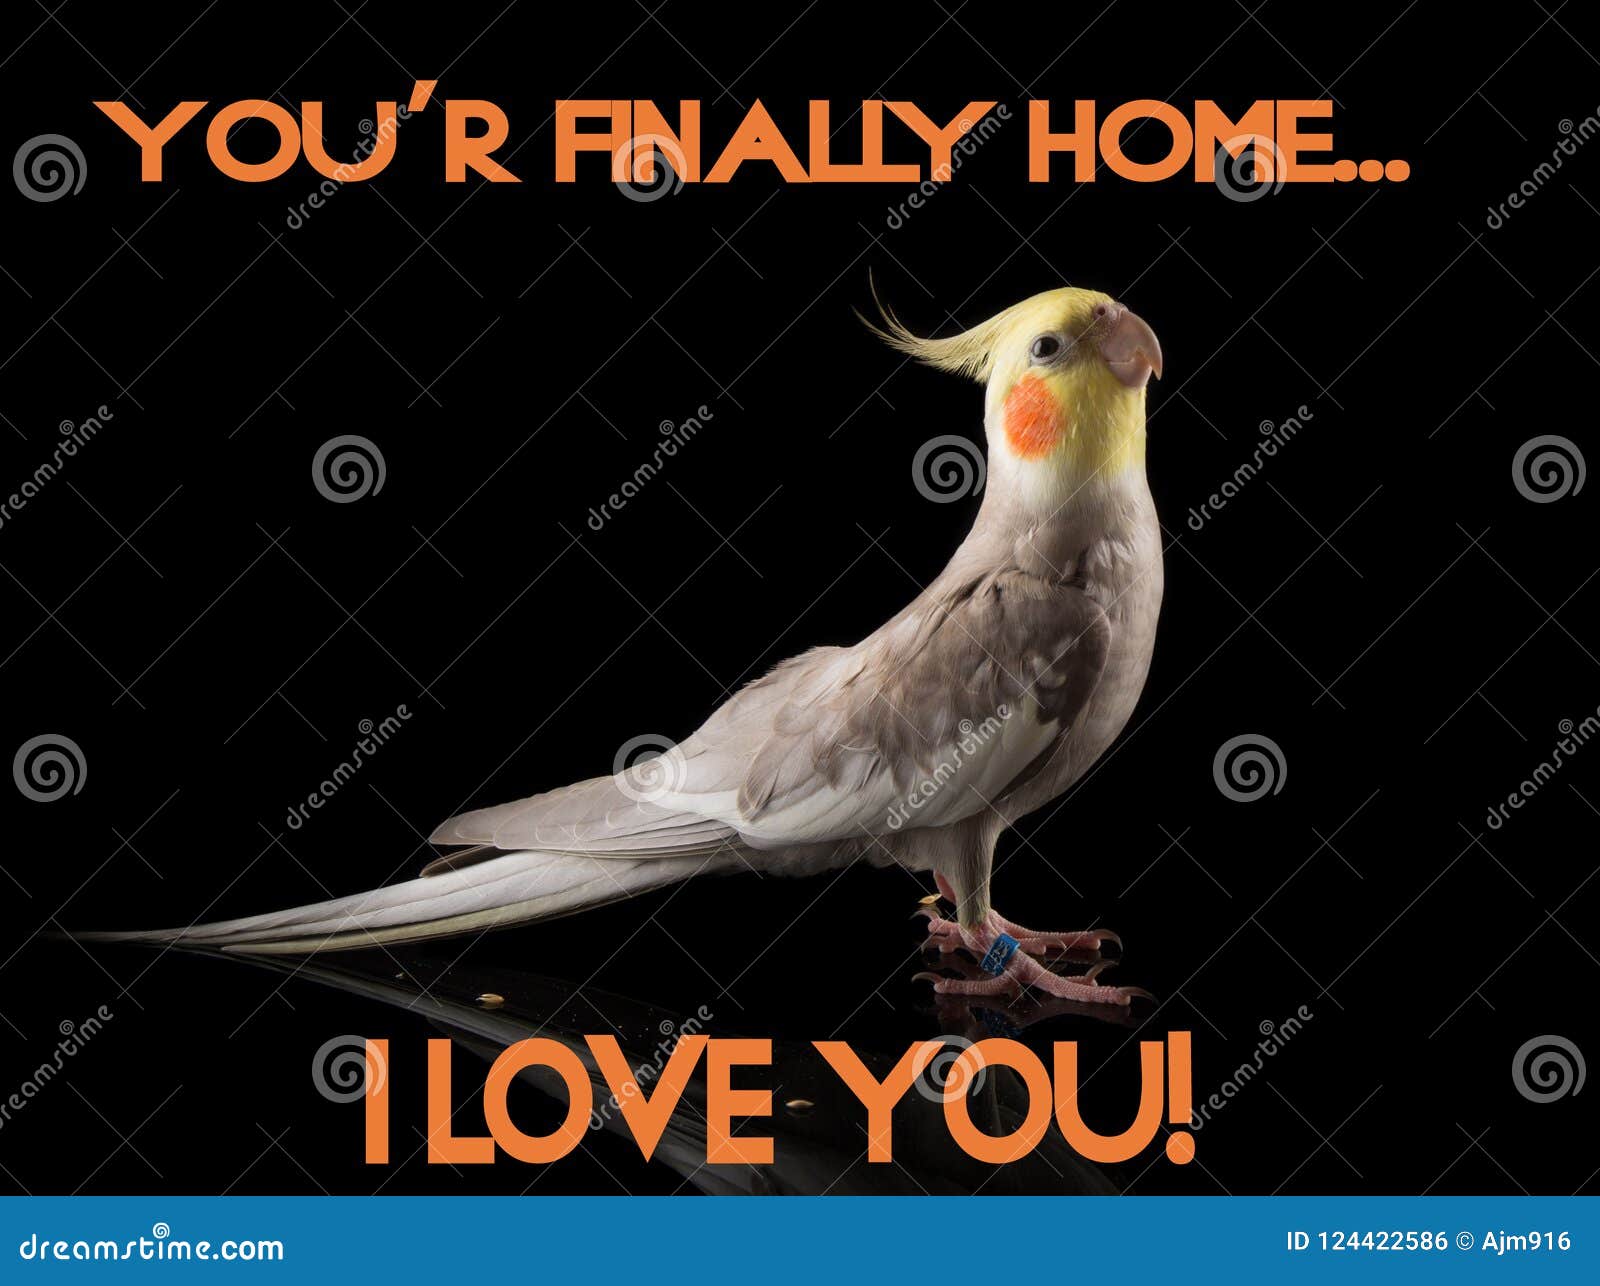 Meme, Parrot Quote, Cockatiel Very Cute Happy Crest Down, Smiling, Happy Face In ...1300 x 1062